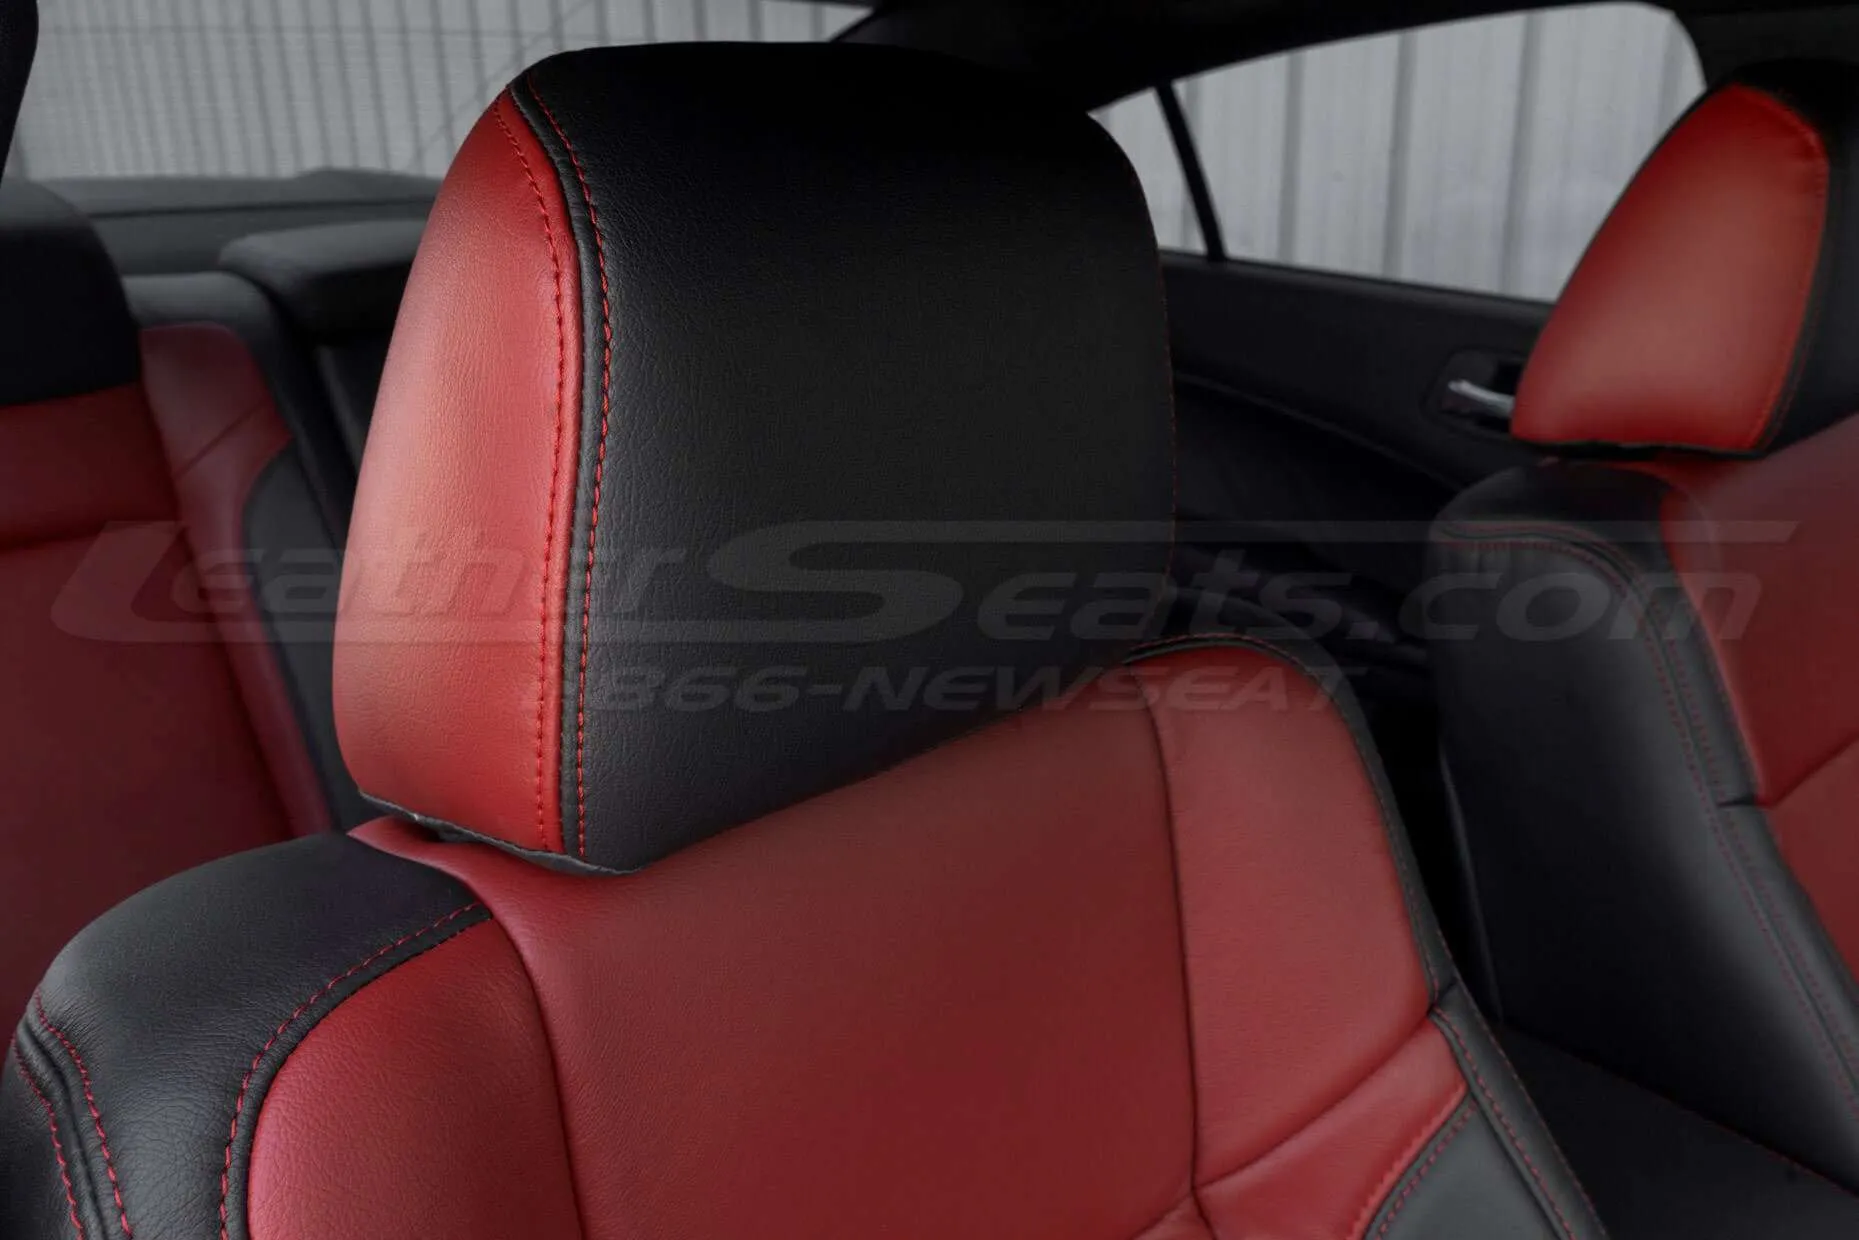 Two-tone leather headrest with contrasting Cardinal stitching